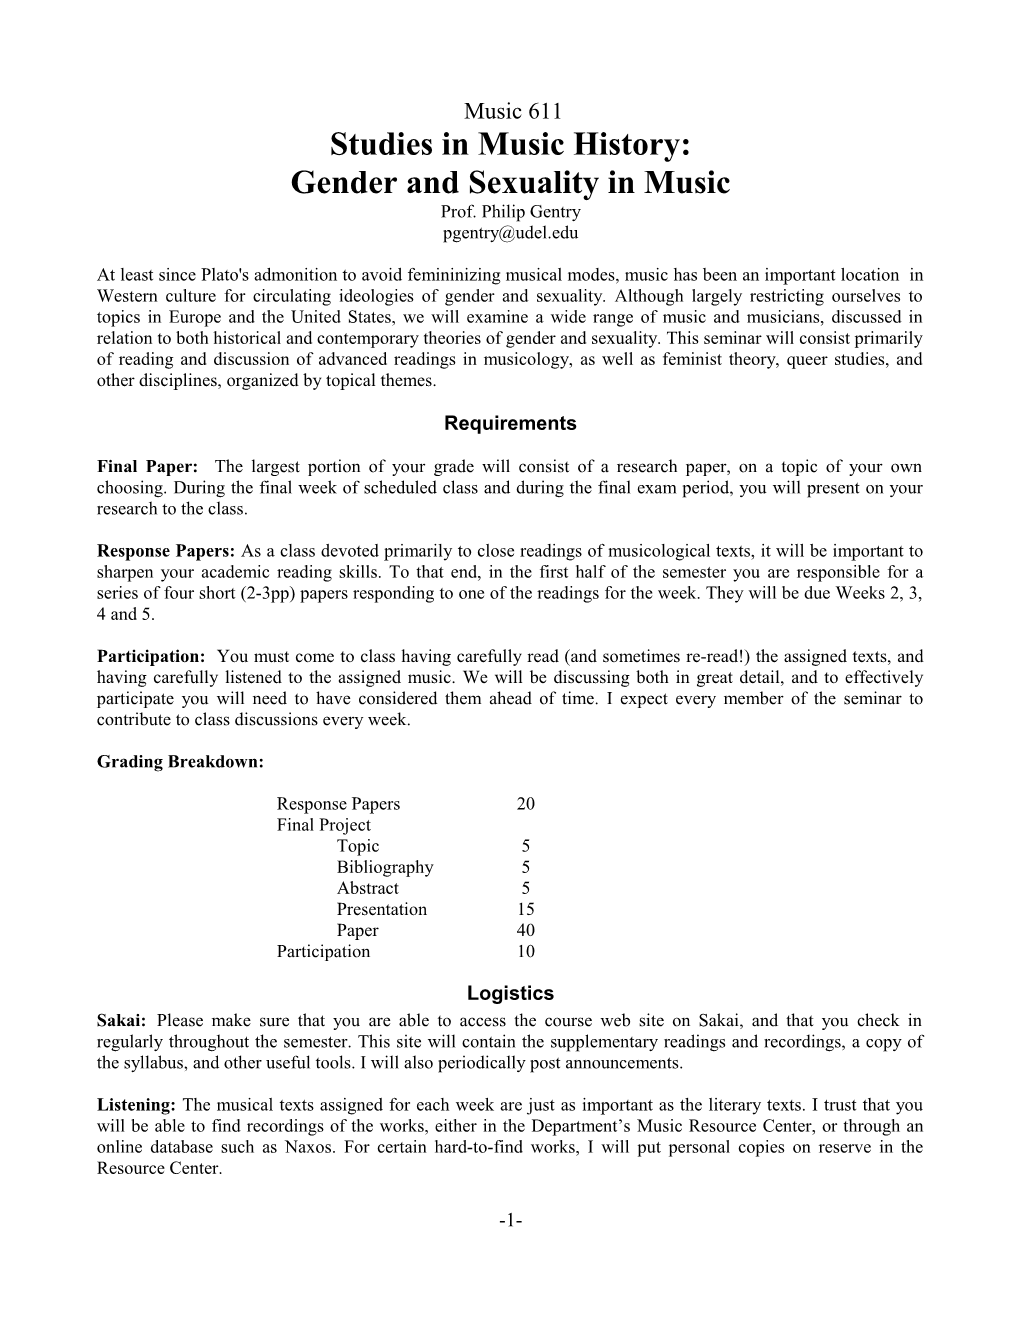 Music 365, Gender and Sexuality in Music